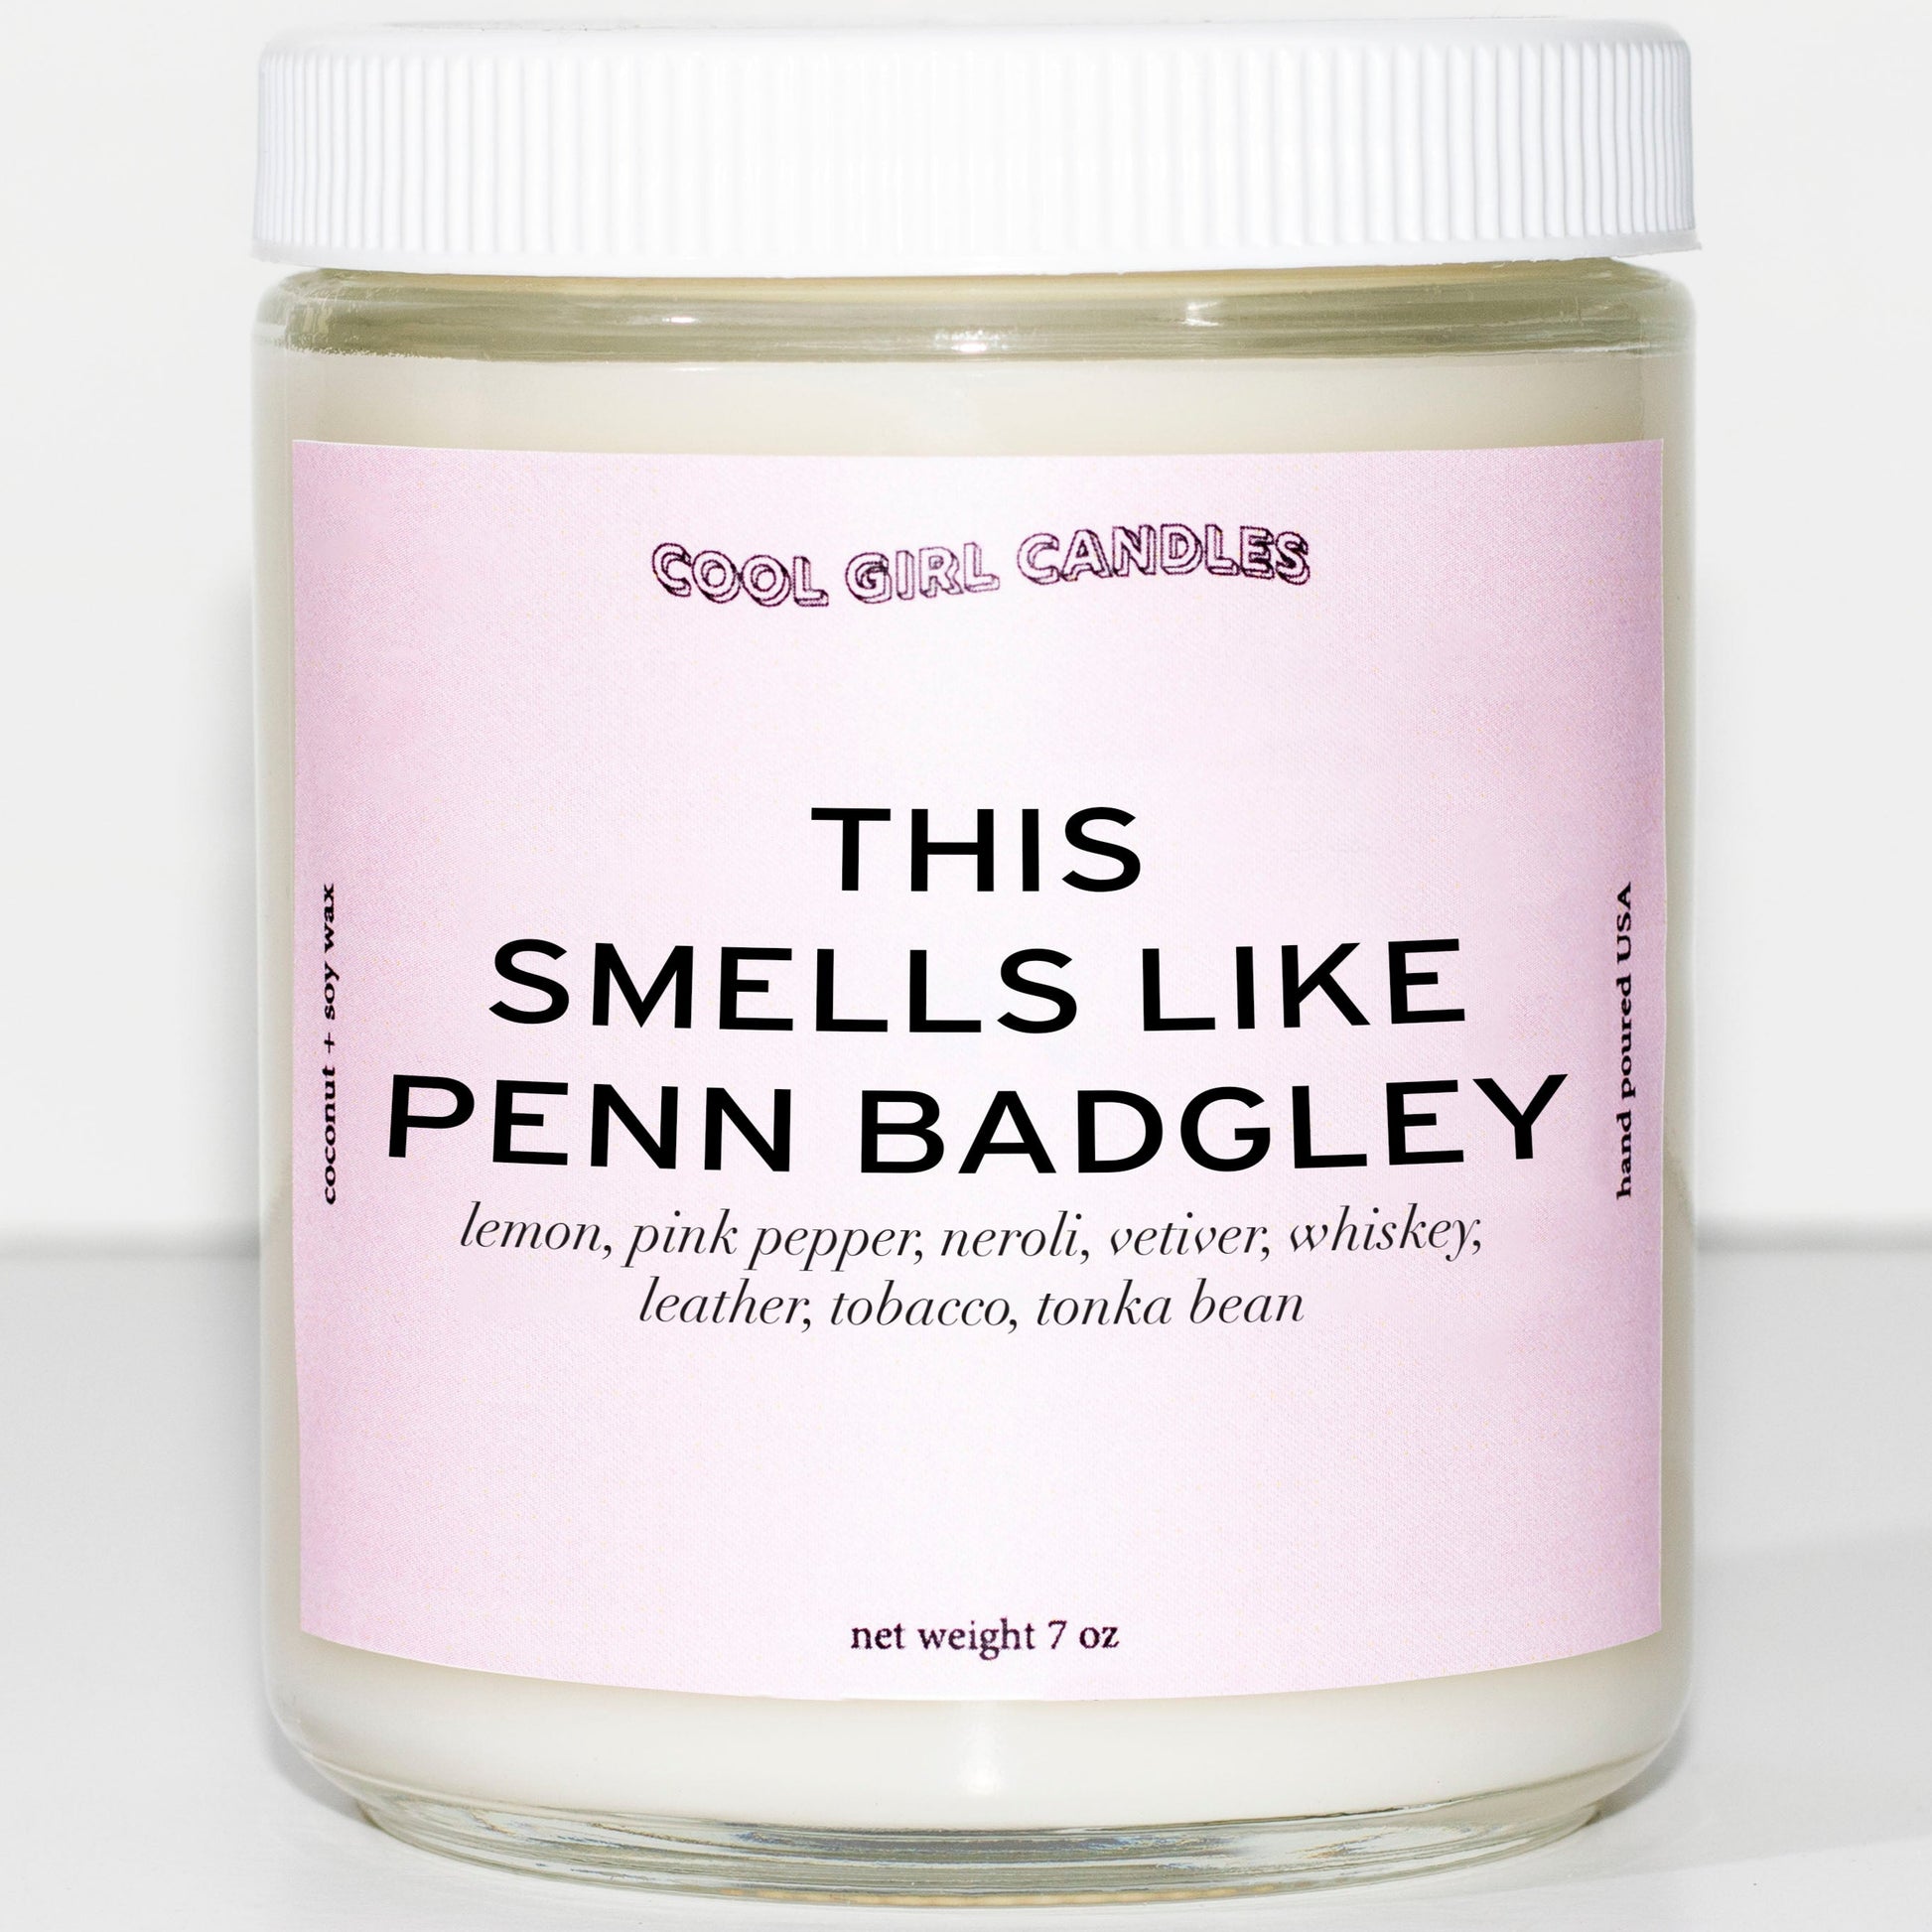 Smells like penn badgley candle. A gift for YOU and joe goldberg fans by cool girl candles